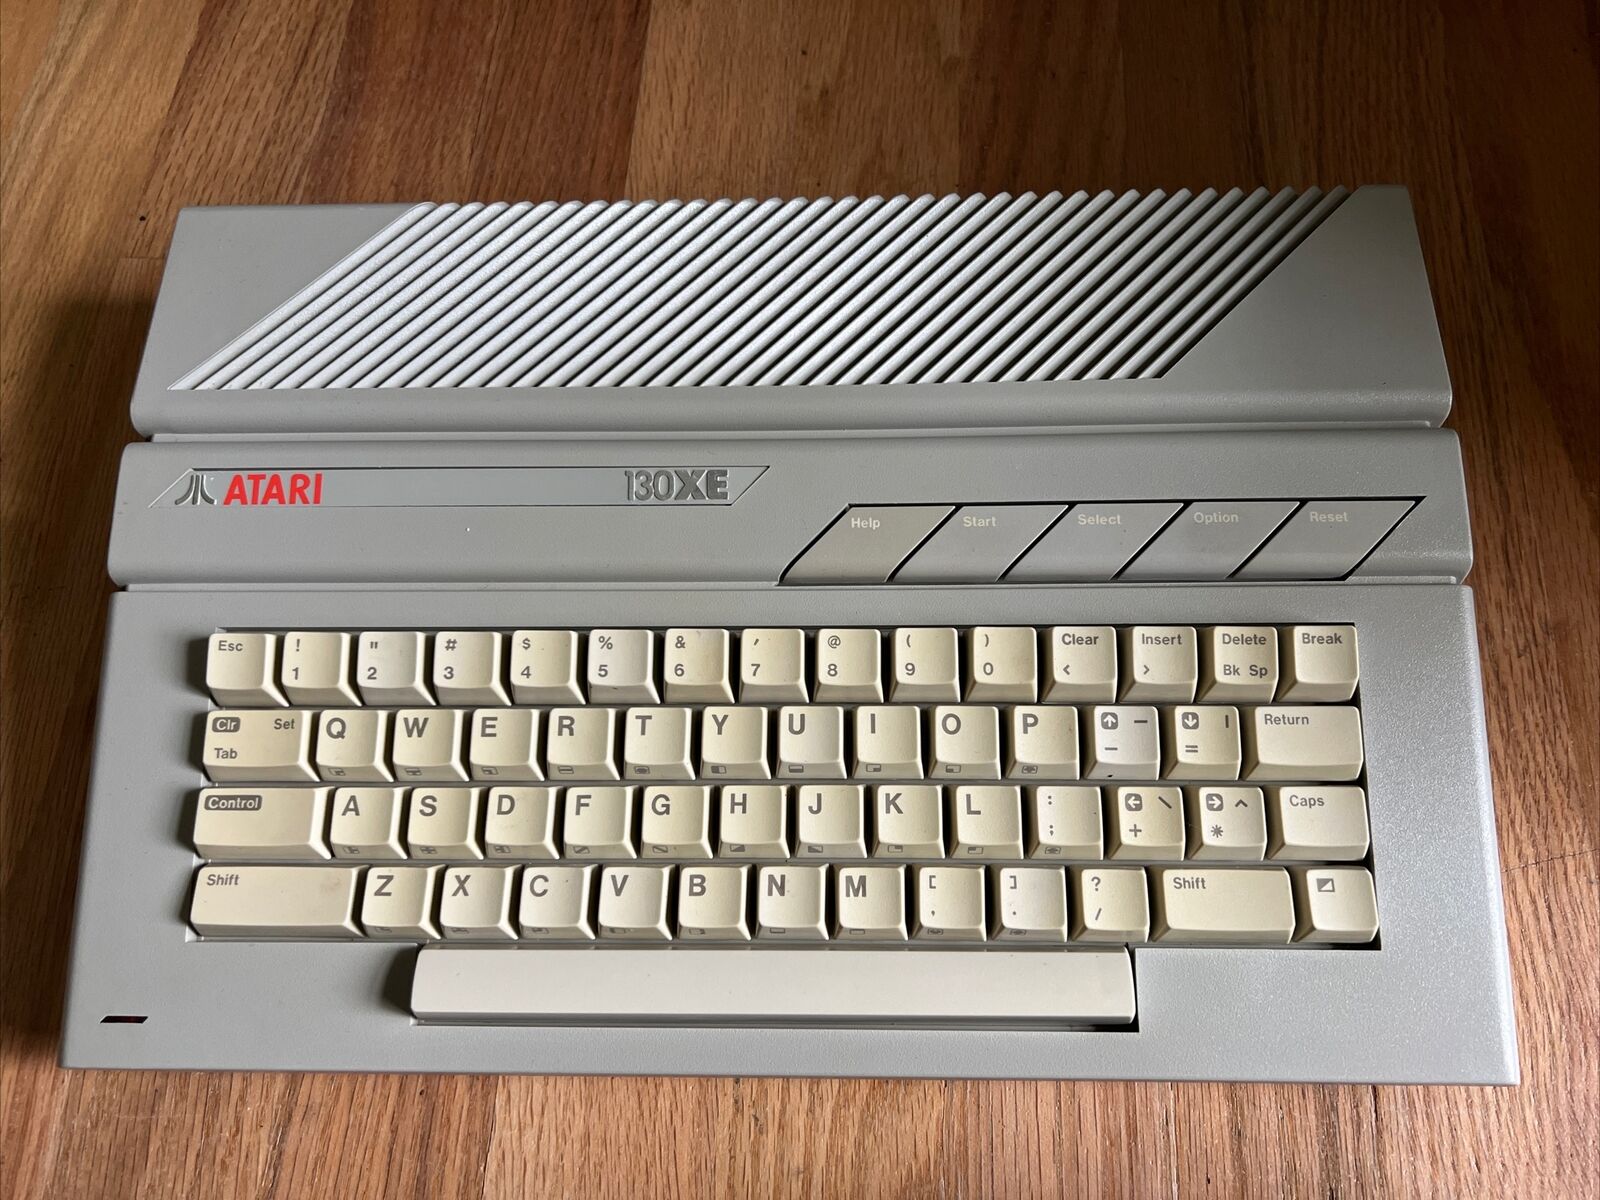 Atari 130xe in very nice condition, fully tested